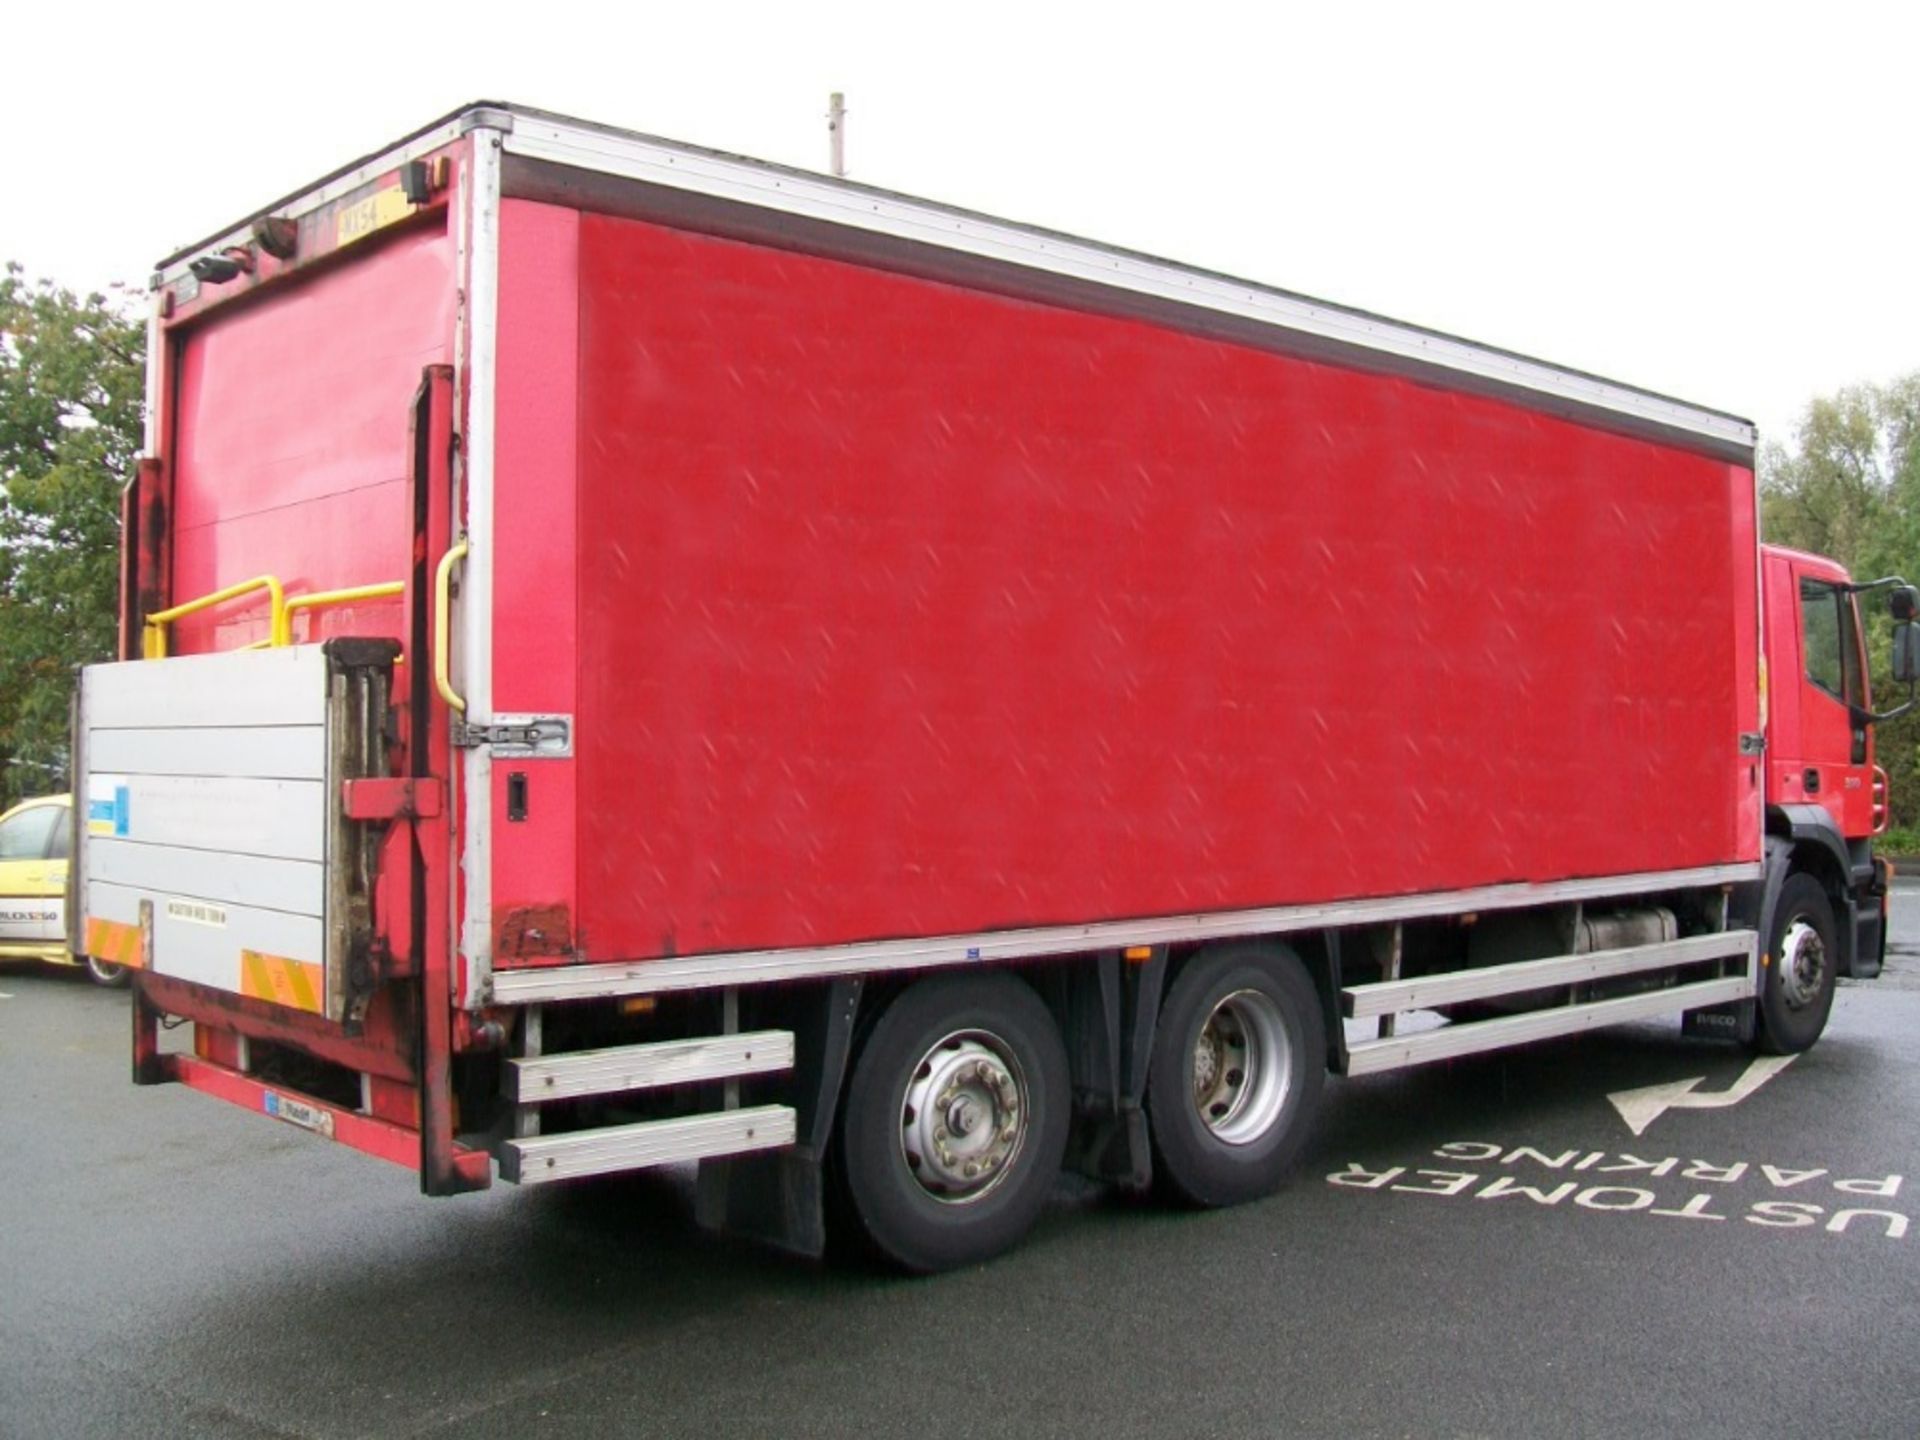 Iveco Stralis 6x2 Day Cab 25ft Curtainsider c/w Rear Steer Axle & Ratcliffe Column Tail Lift, Regist - Image 2 of 3